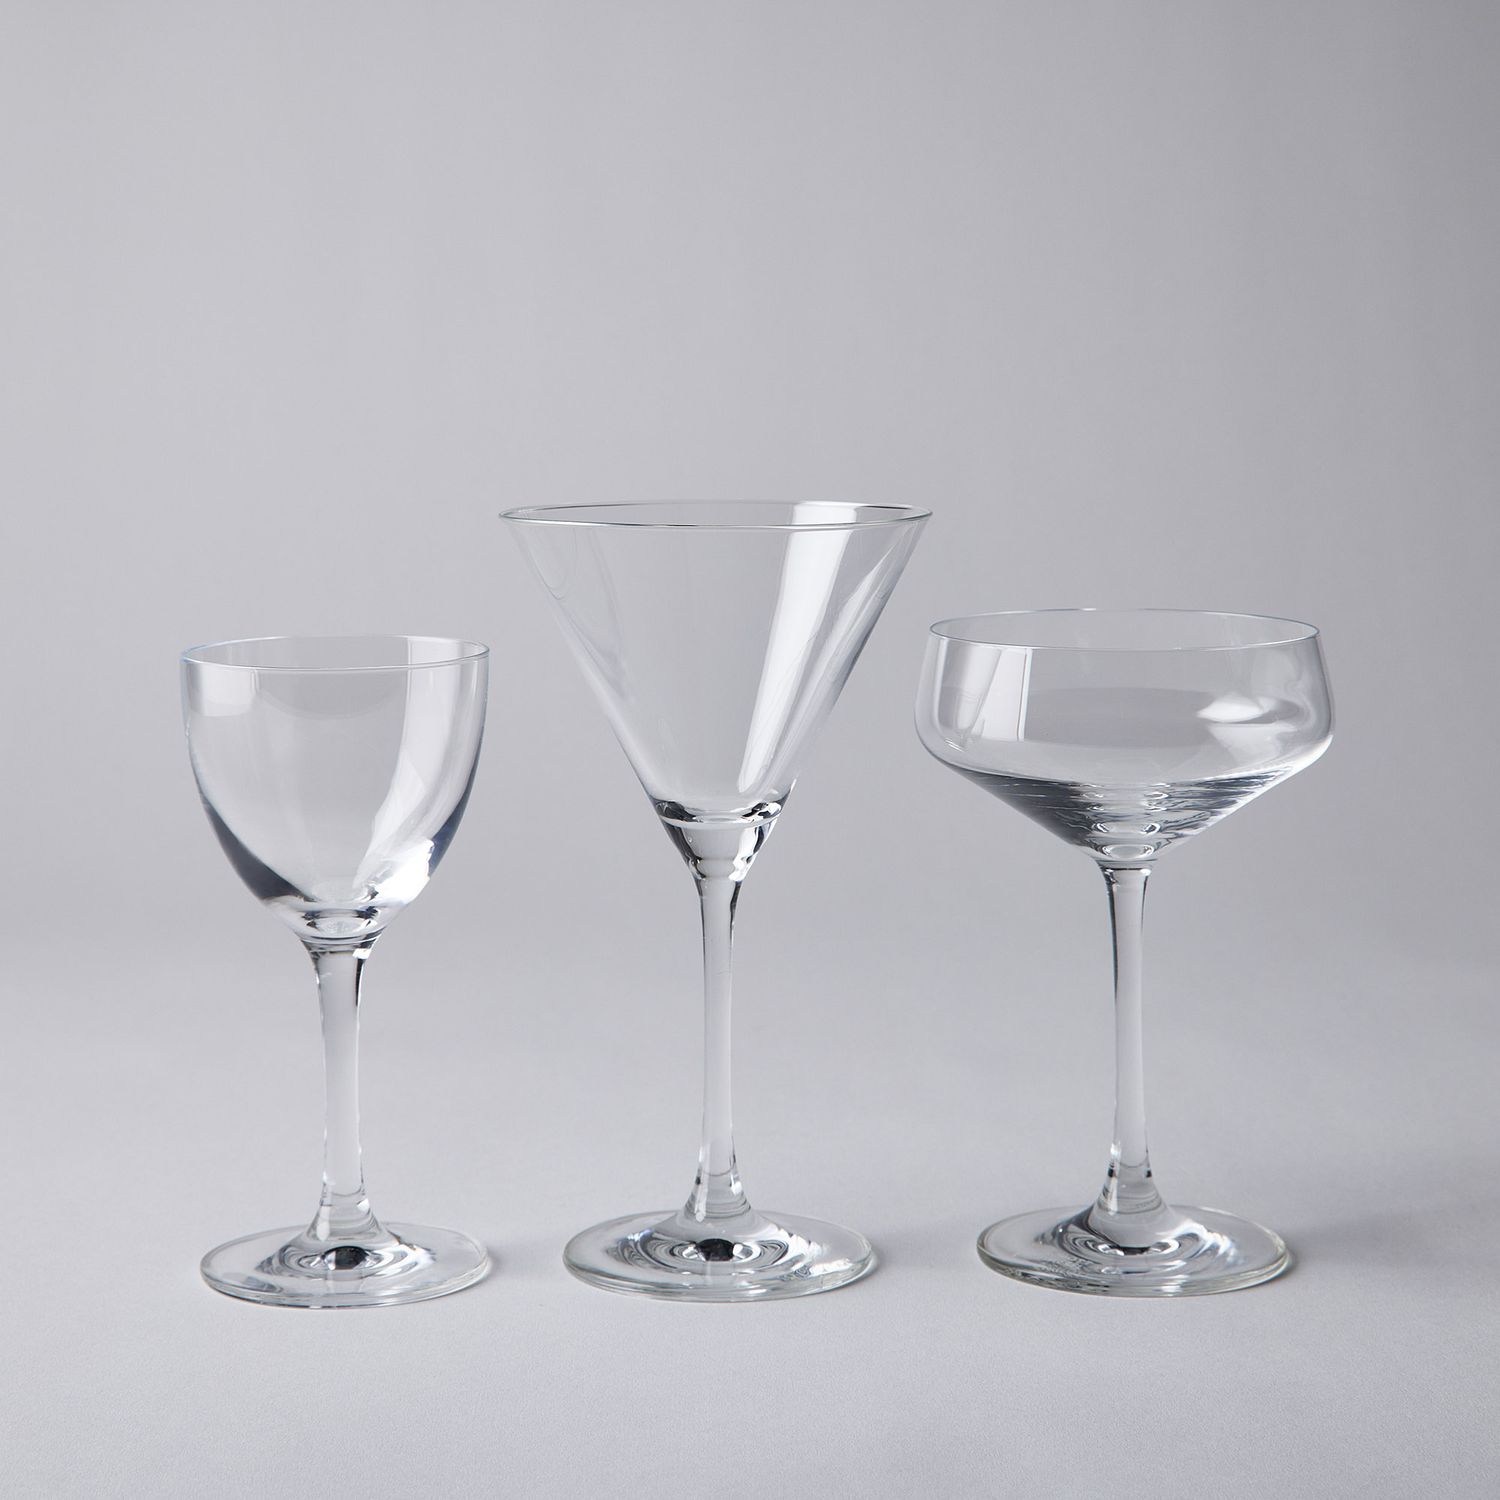 Schott Zwiesel Complete Bar Classic Cocktail Glasses 12-Piece Set,  Exclusive on Food52